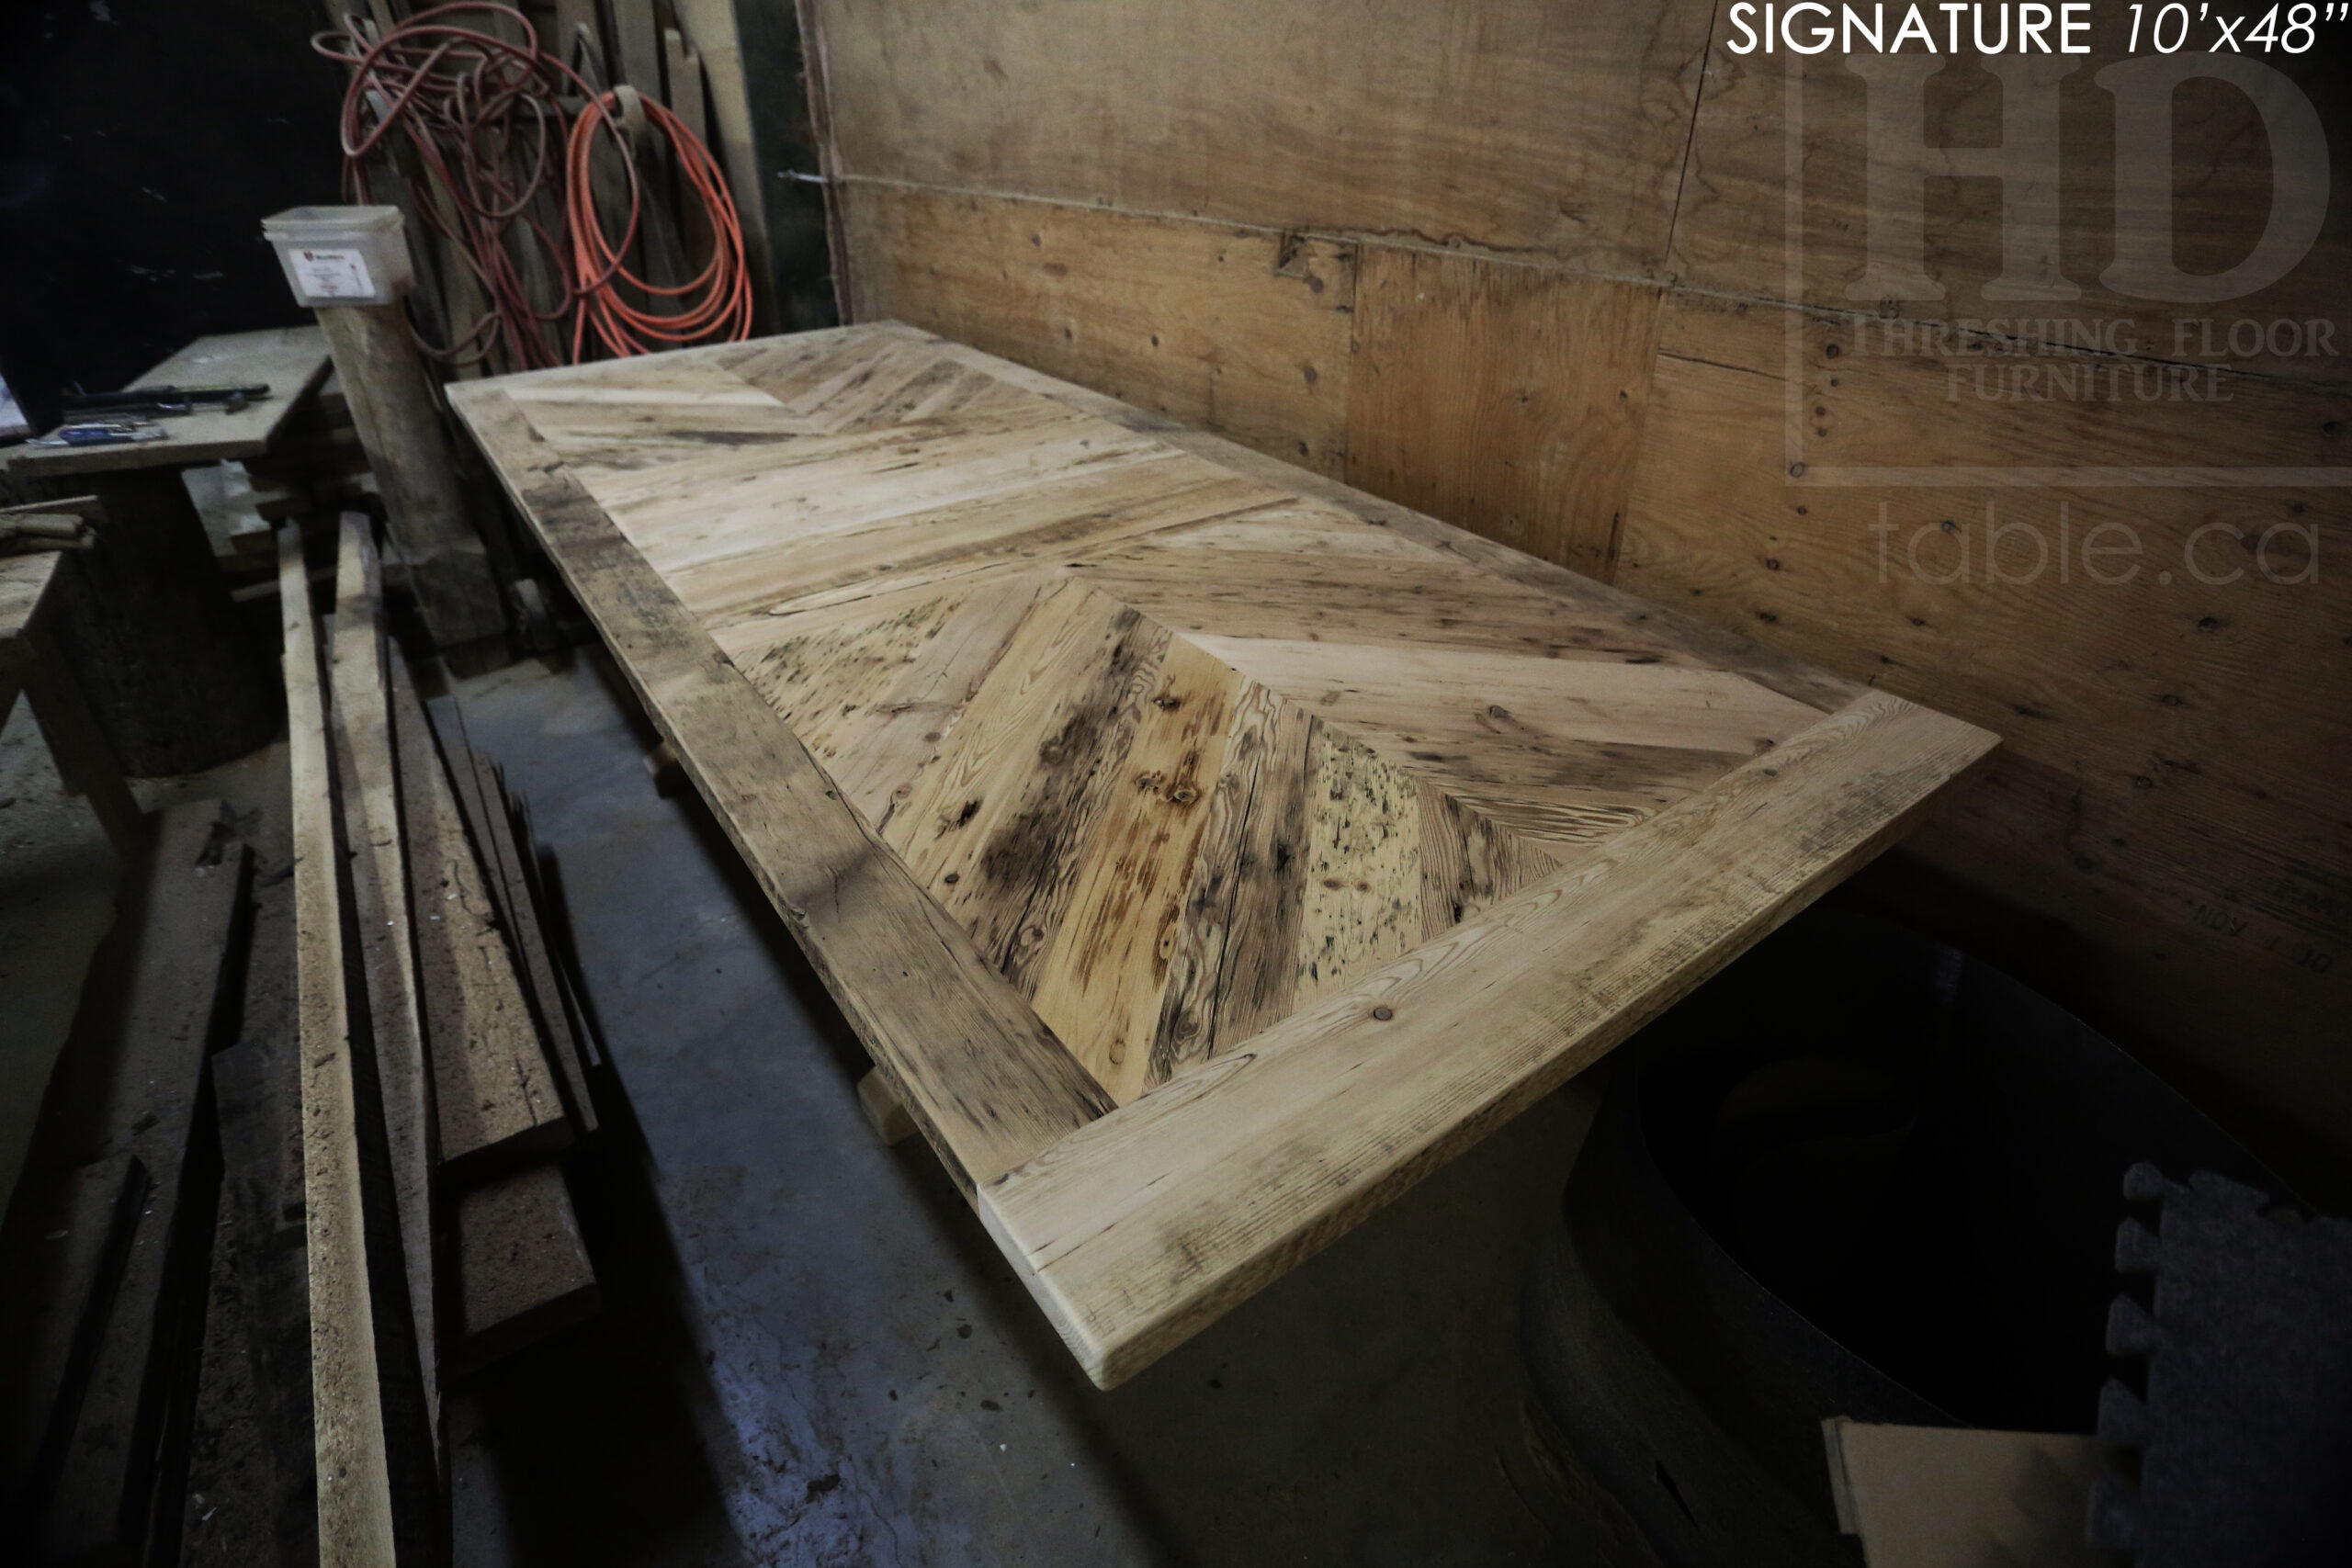 10' Reclaimed wood boardroom table made for a Maple, ON company - 48" wide - Hemlock Threshing Floor Construction - Original edges & distressing maintained - Customized joinery - Premium epoxy + satin polyurethane finish - Stainless Steel Base - www.table.ca